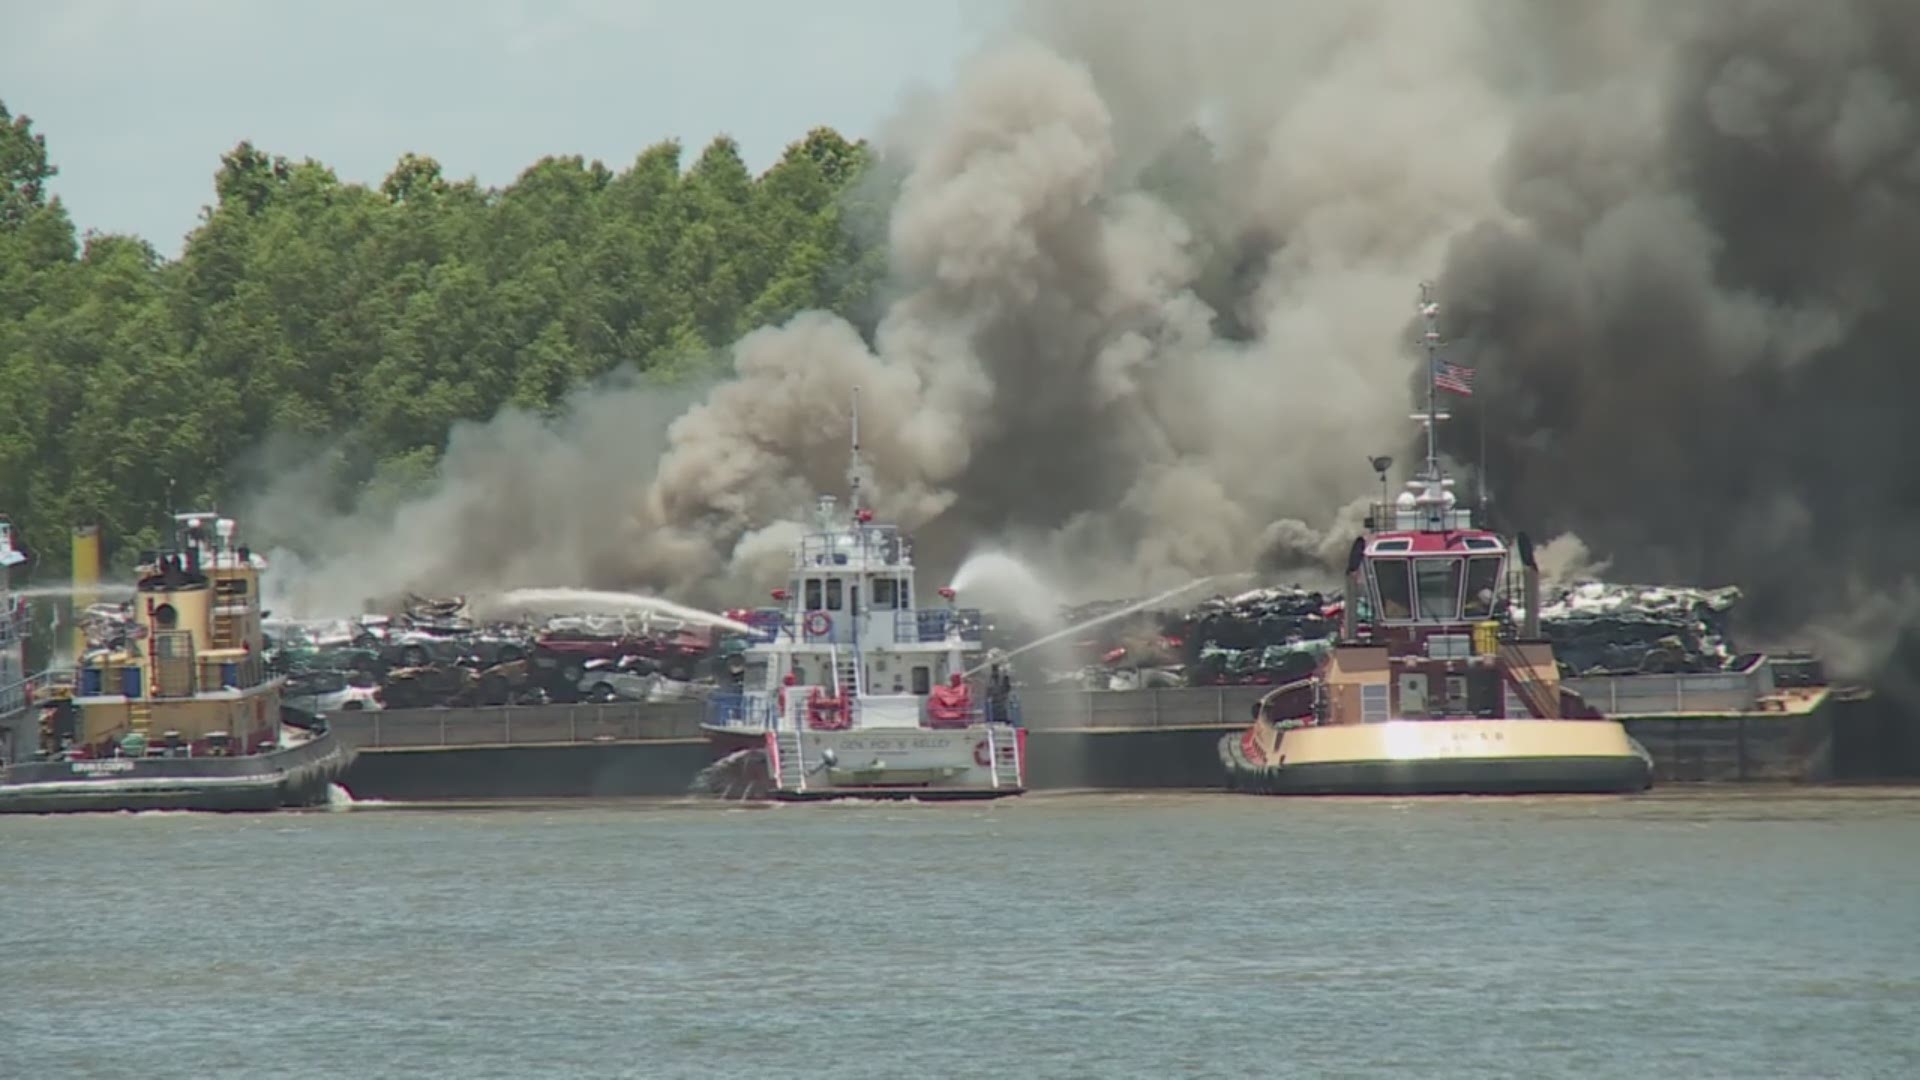 Raw footage shows tugboats helping to put out a barge fire on the Mississippi River in Jefferson Parish